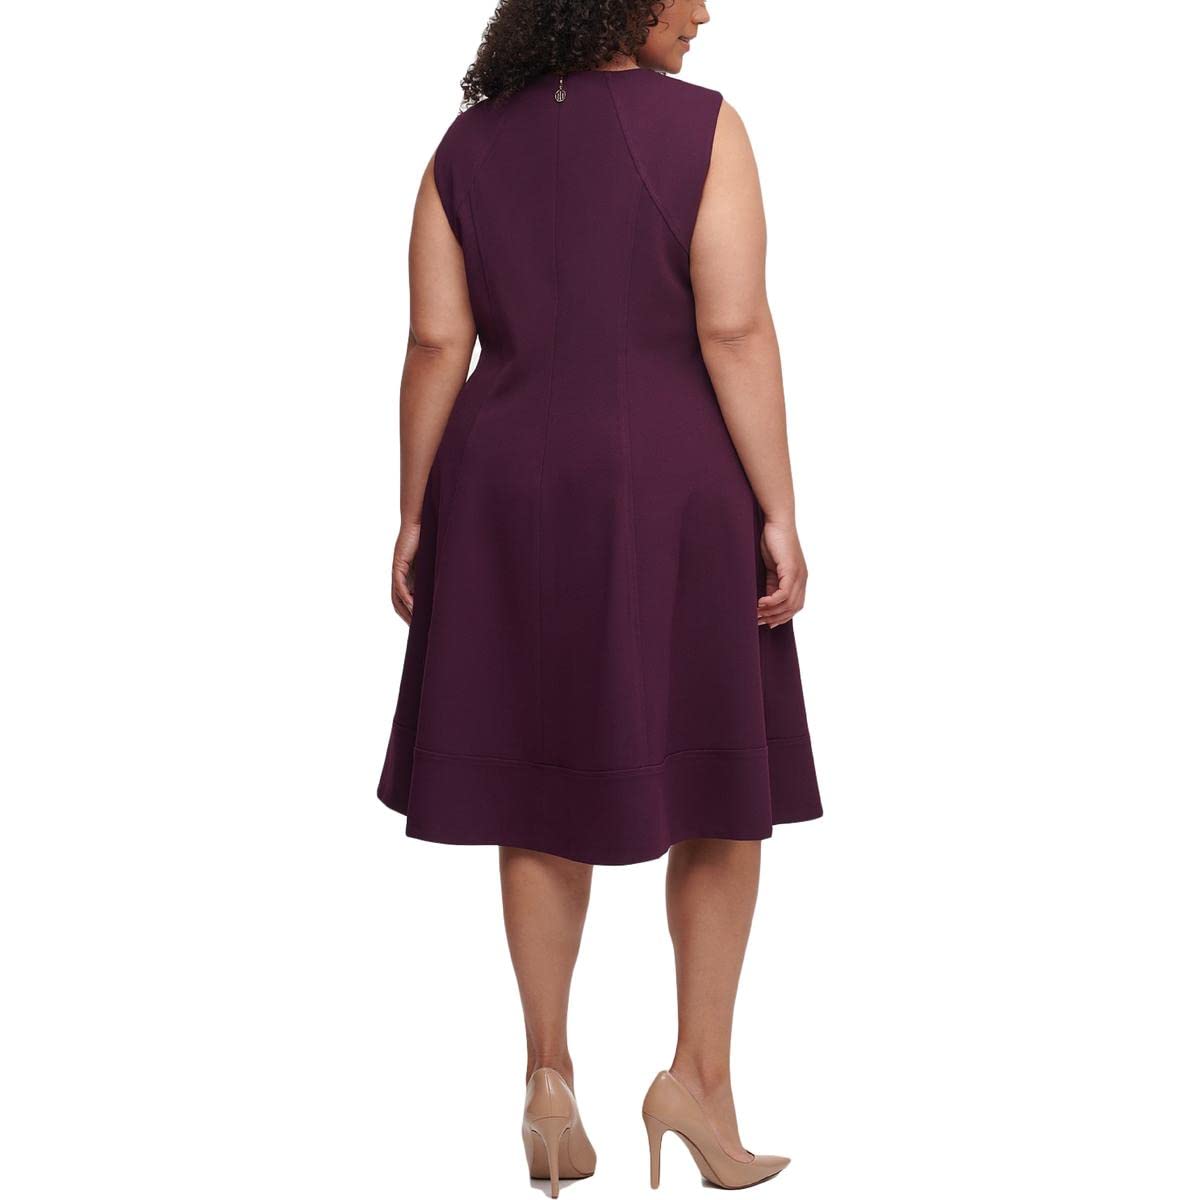 Tommy Hilfiger Women's Plus Size Fit and Flare Dress